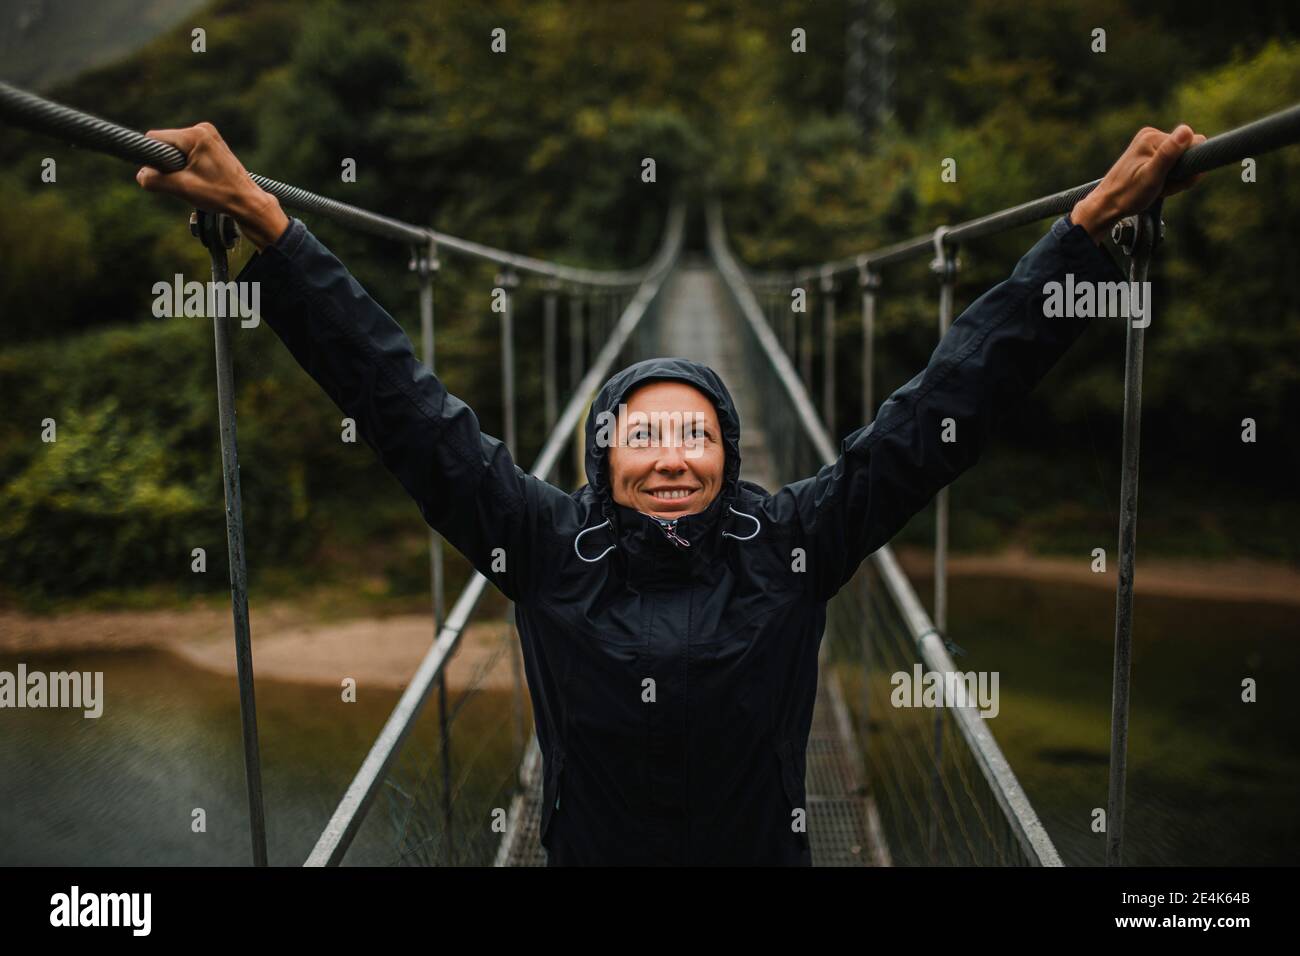 Smiling woman wearing raincoat with arms raised standing on suspension bridge over Sella river in forest Stock Photo